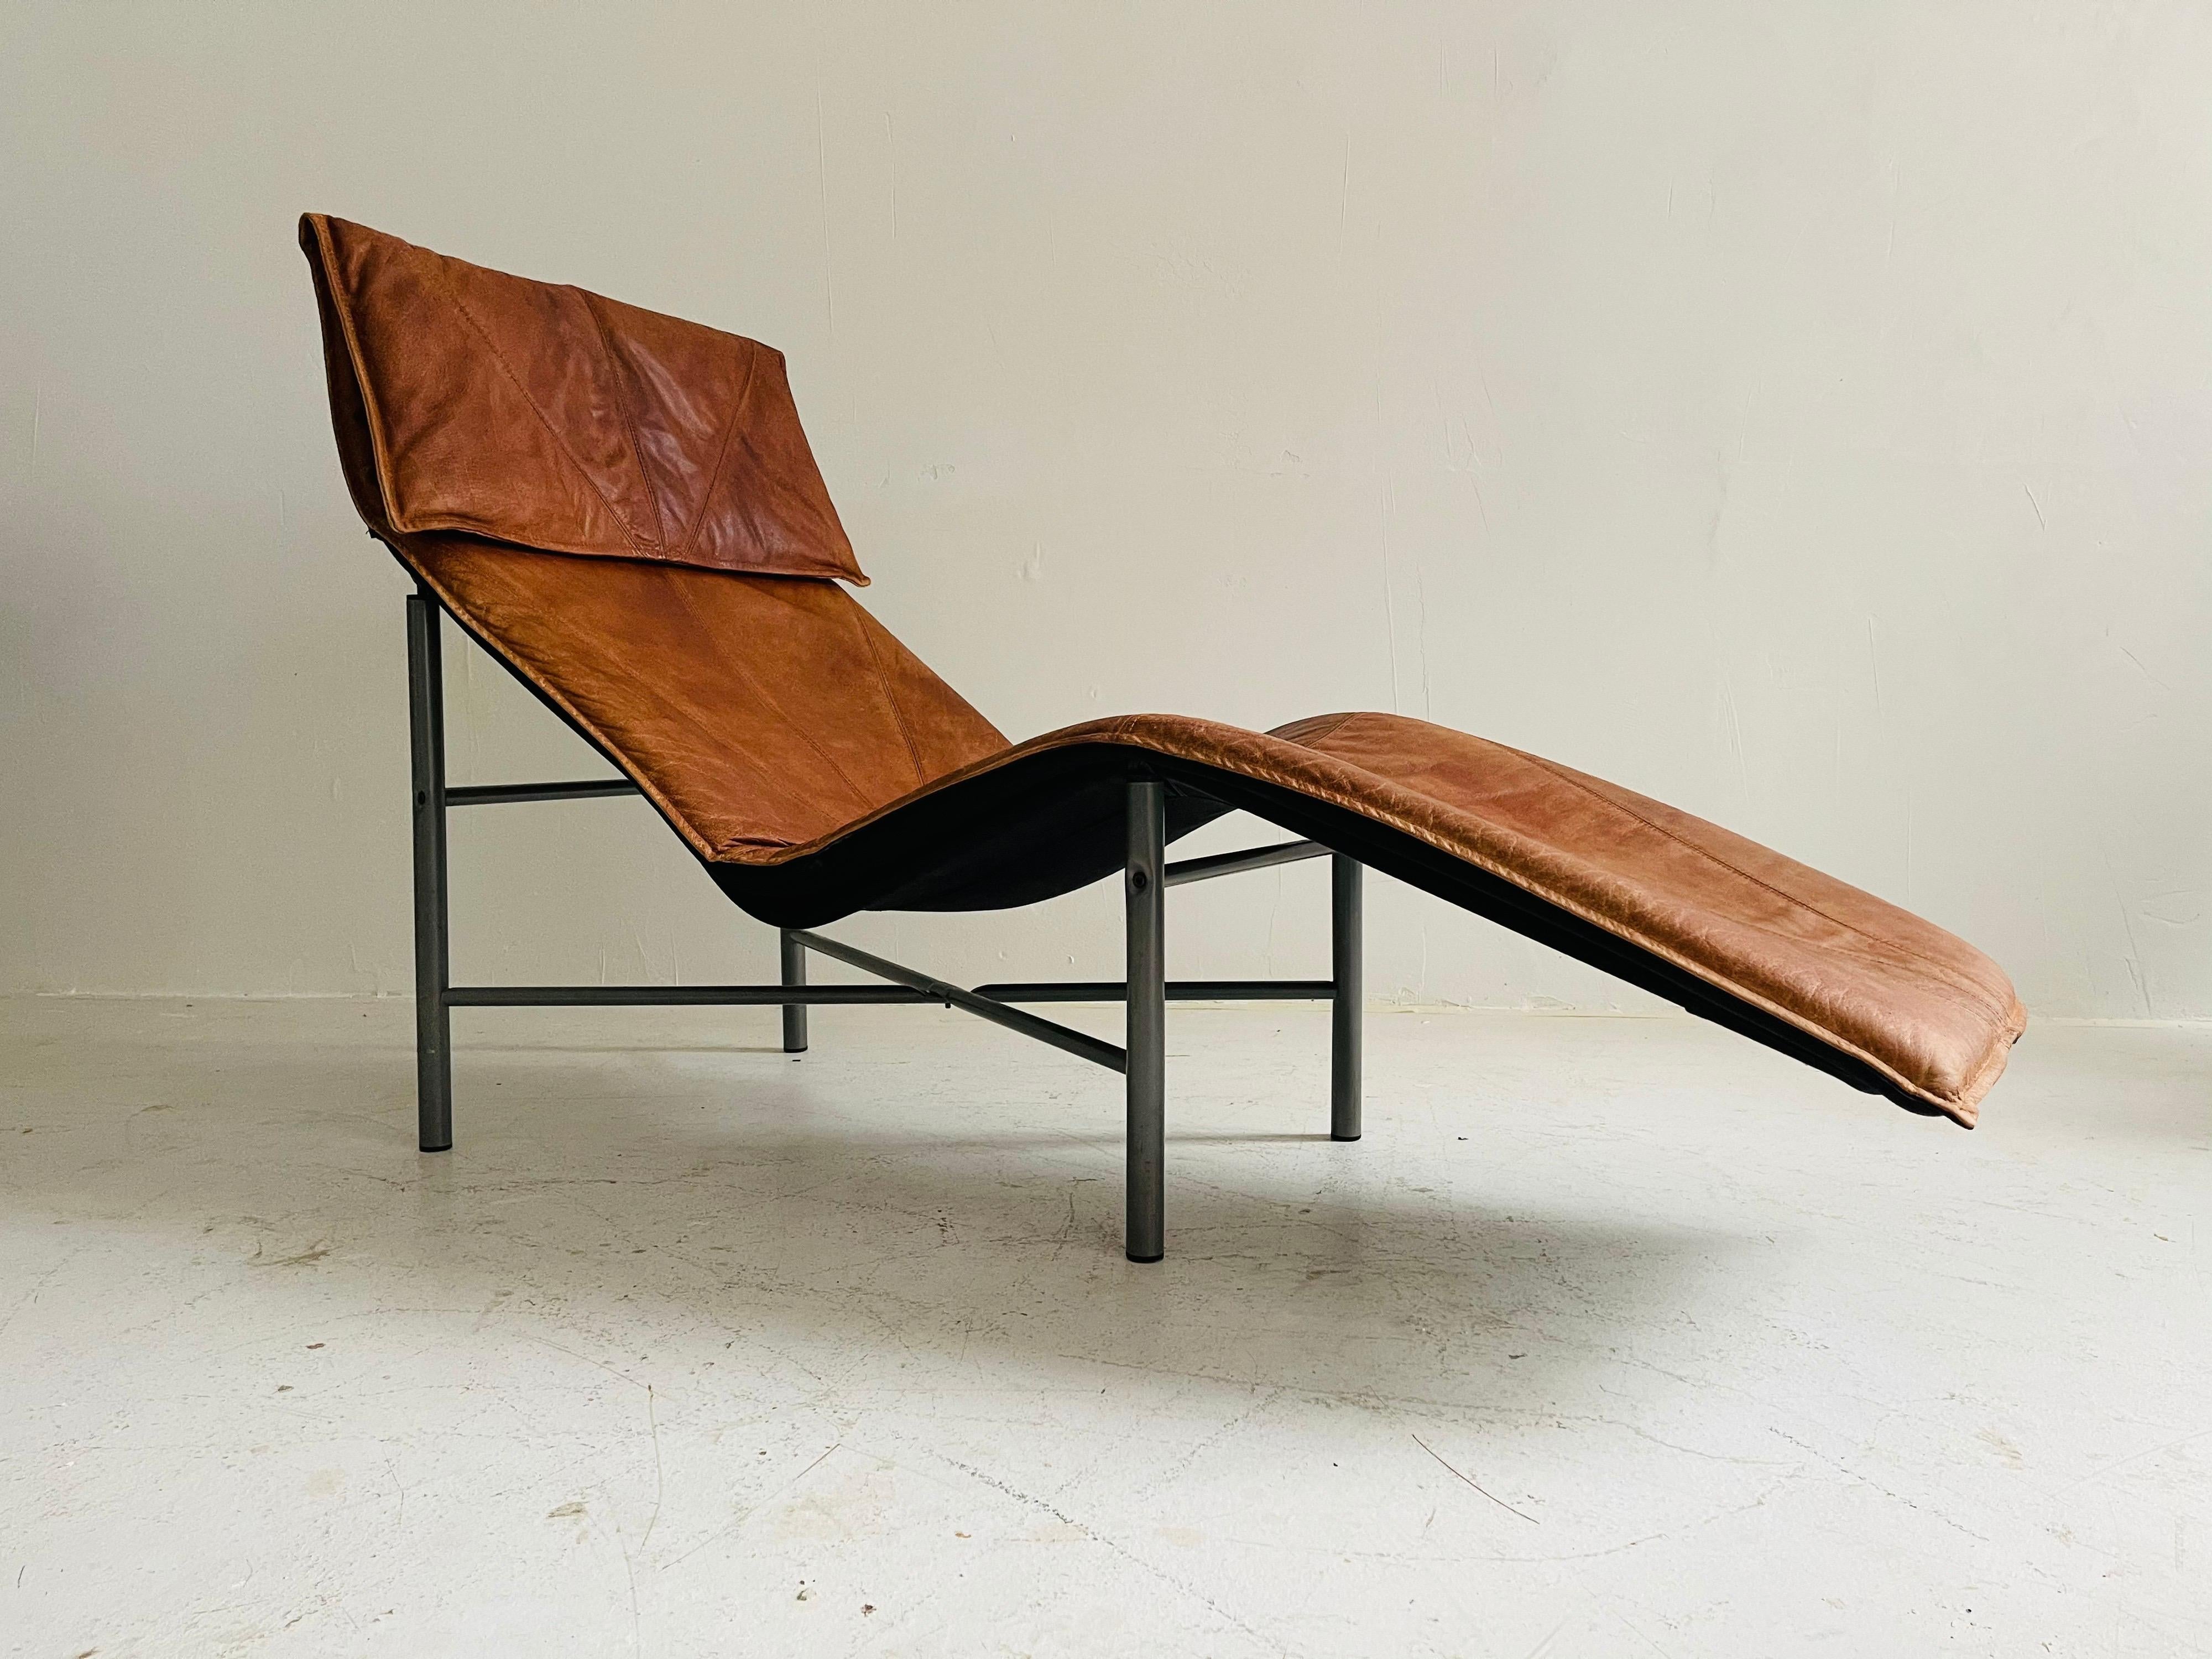 Patinated Cognac Leather Chaise Longue by Tord Bjorklund, Sweden, 1970 For Sale 10